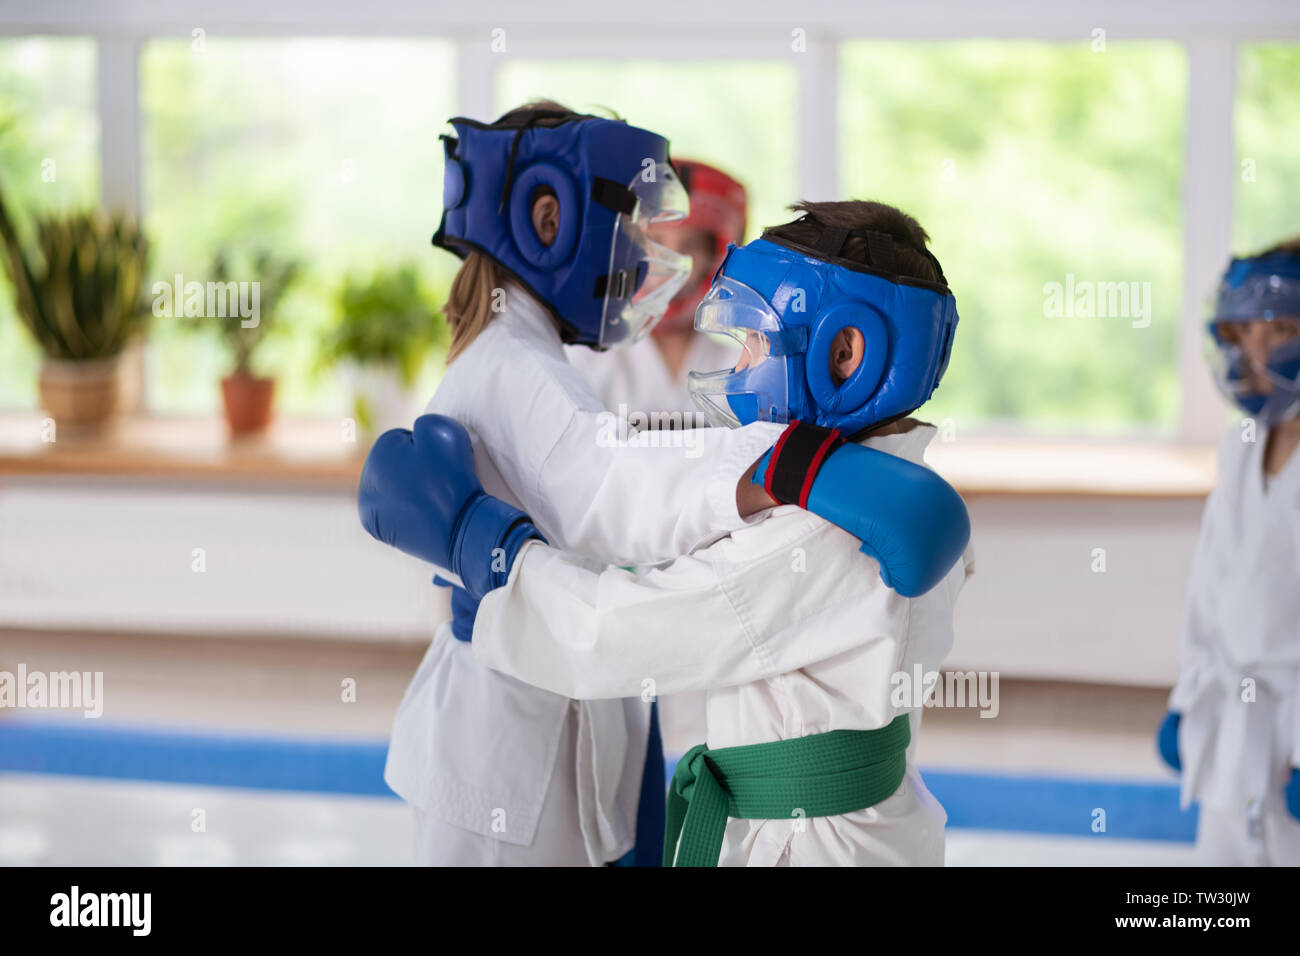 Practicing fight. Boy and girl wearing protective helmets practicing fight together Stock Photo